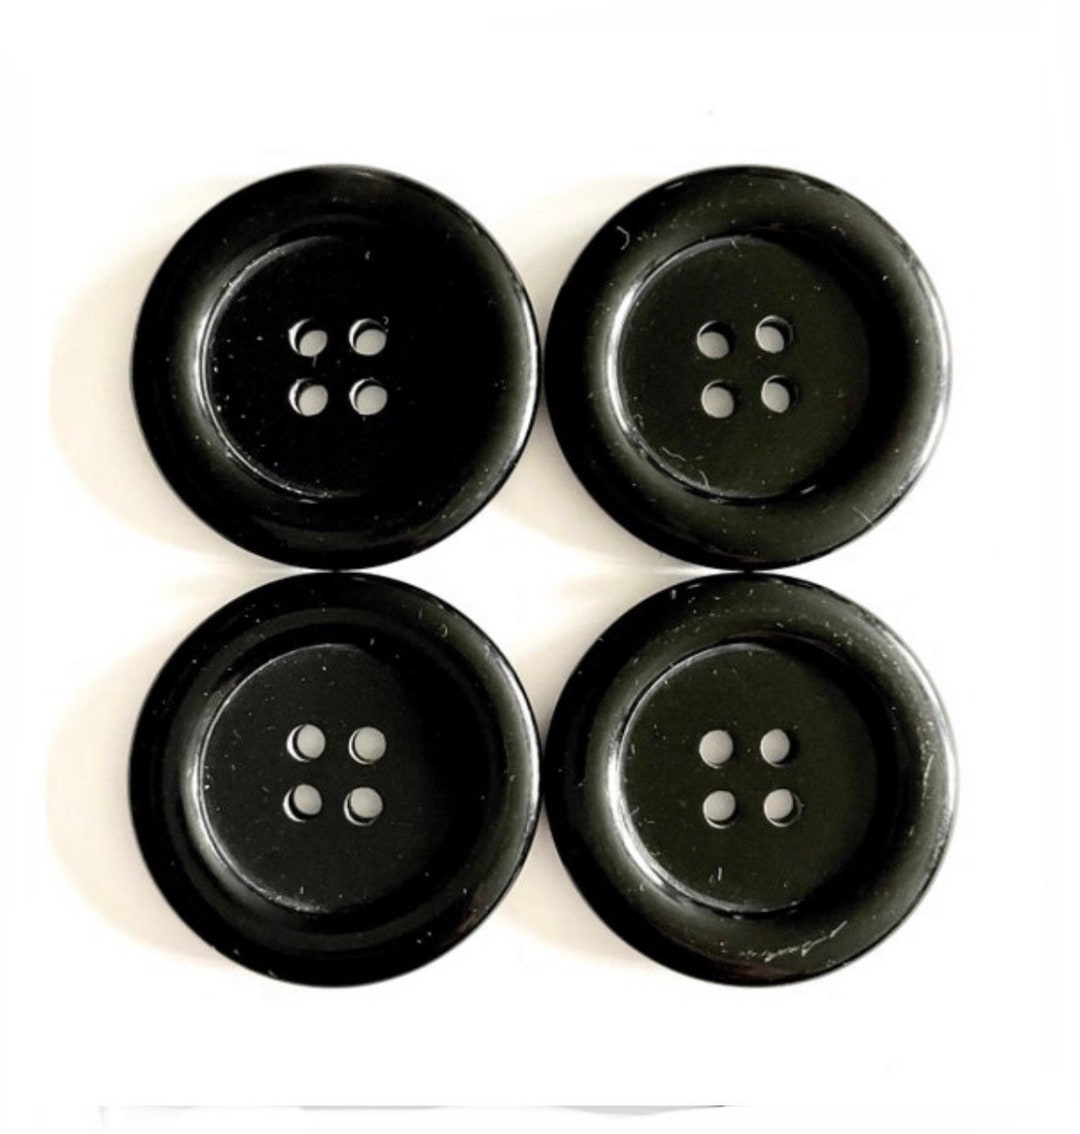 35MM 4 Vintage Black Buttons for Knitting Sewing 4hole - Etsy